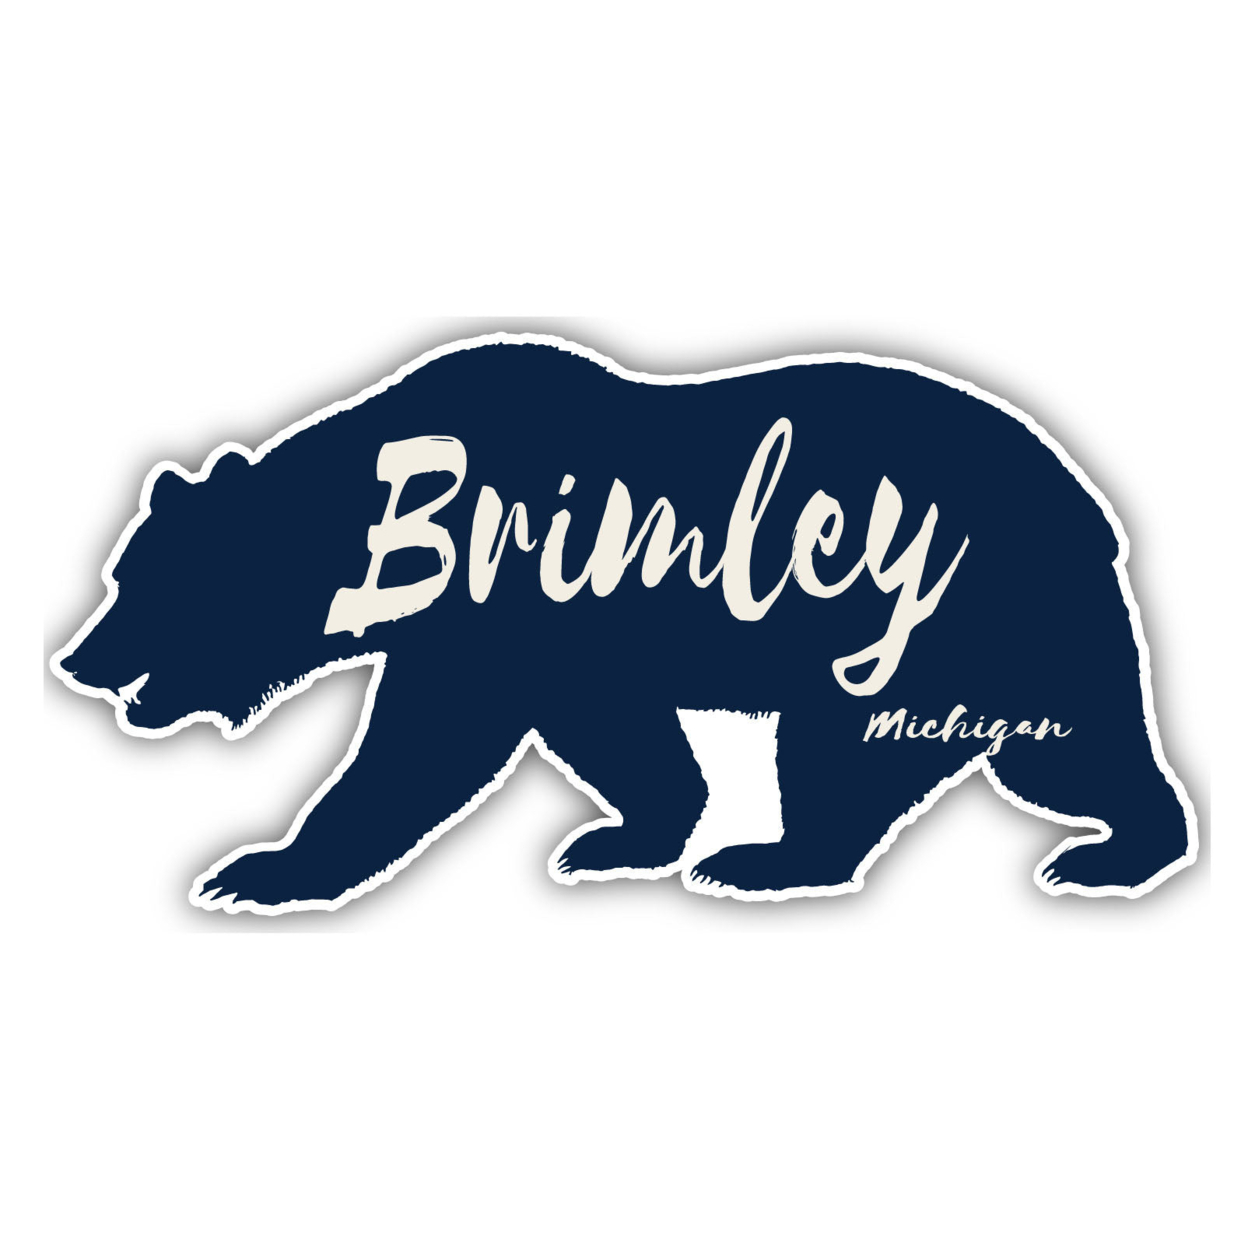 Brimley Michigan Souvenir Decorative Stickers (Choose Theme And Size) - 4-Pack, 8-Inch, Great Outdoors